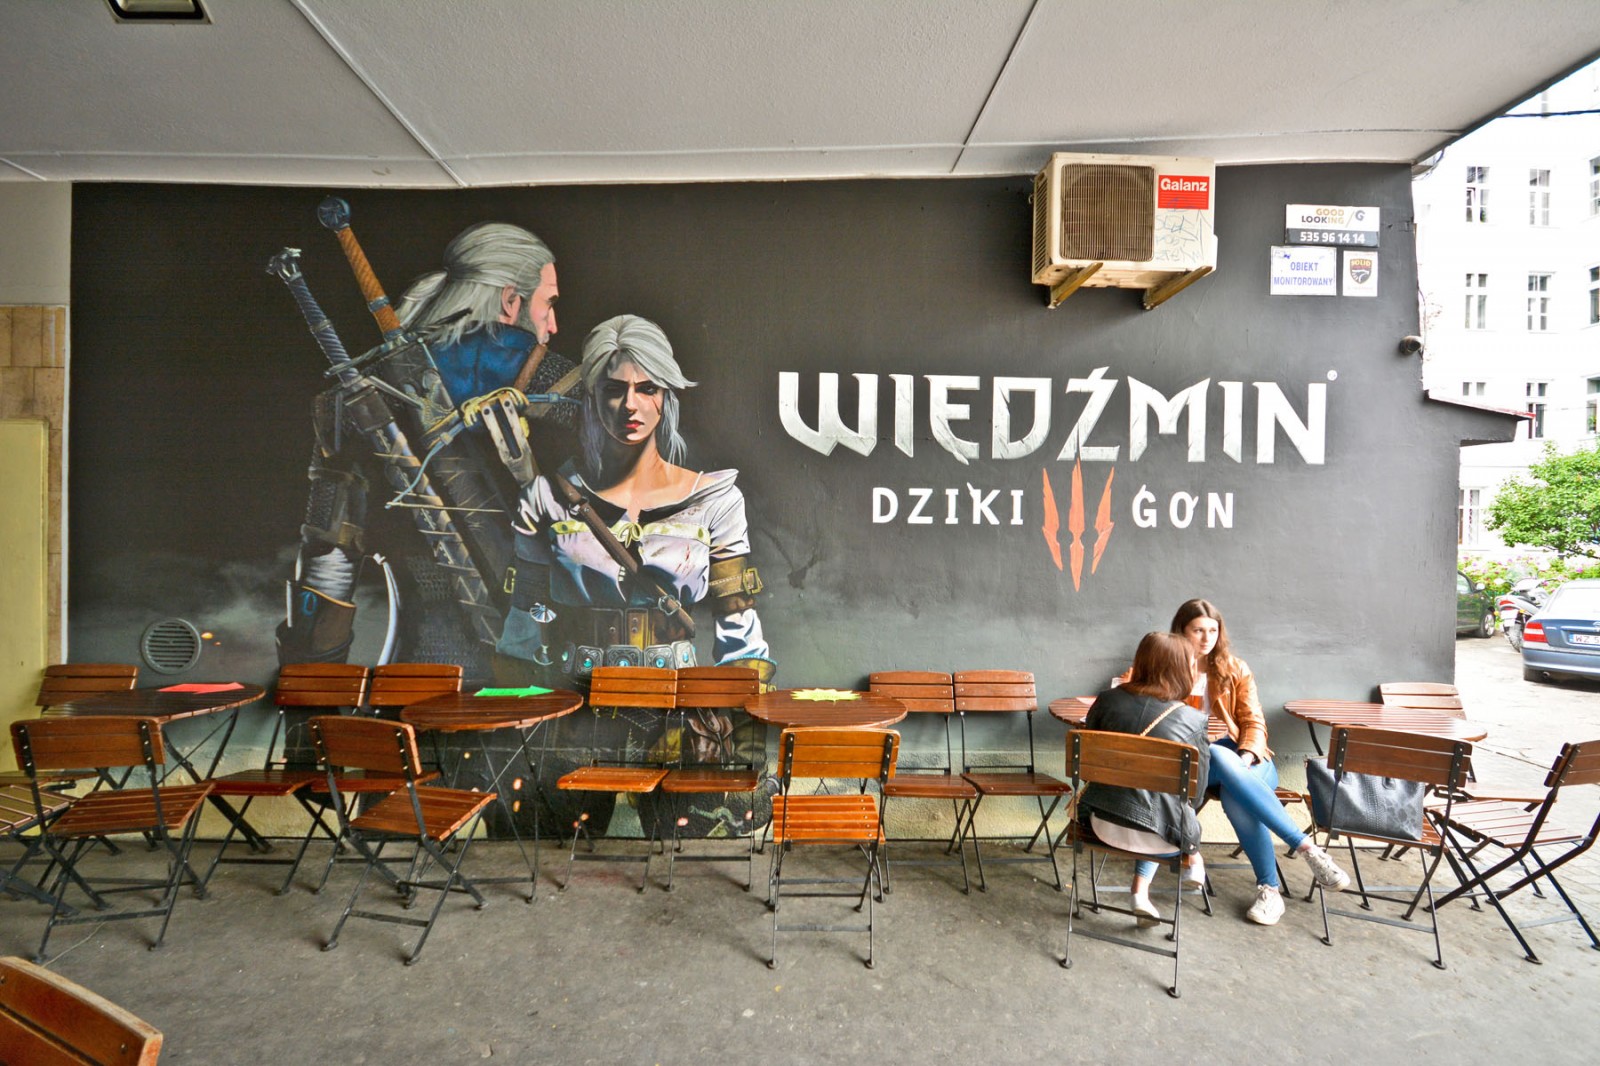 The Witcher Wild Hunt advertising mural on the pavilions wall in Warsaw | The Witcher Wild Hunt | Portfolio